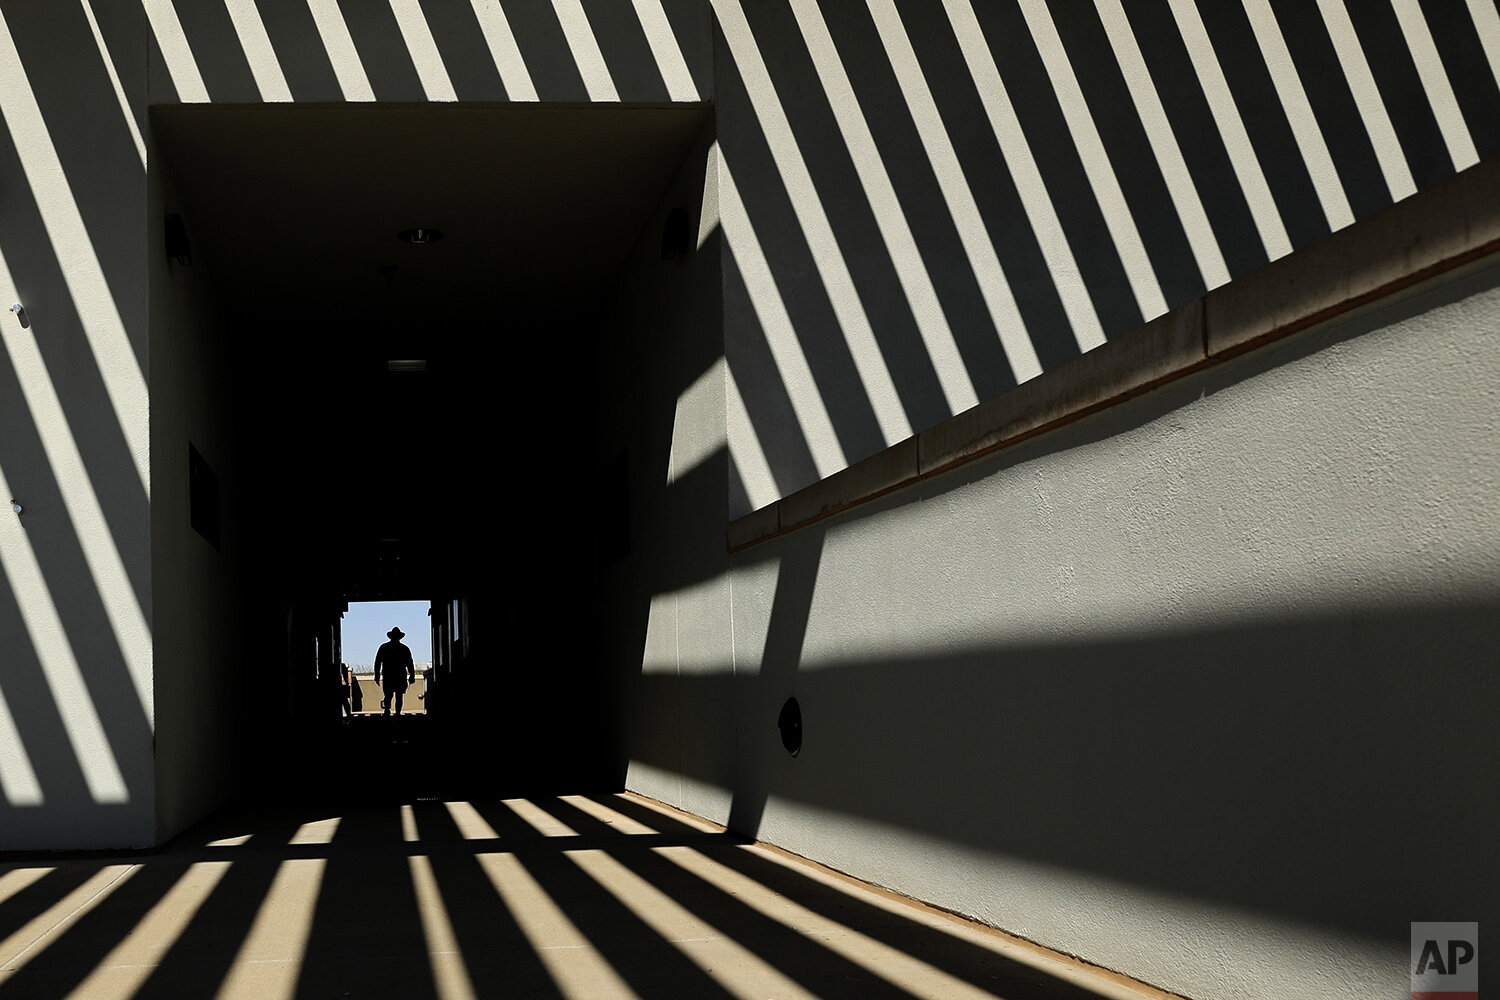  An usher walks along an upper deck concourse before a spring training baseball game between the Cleveland Indians and the San Diego Padres Wednesday, Feb. 26, 2020, in Peoria, Ariz. (AP Photo/Charlie Riedel) 